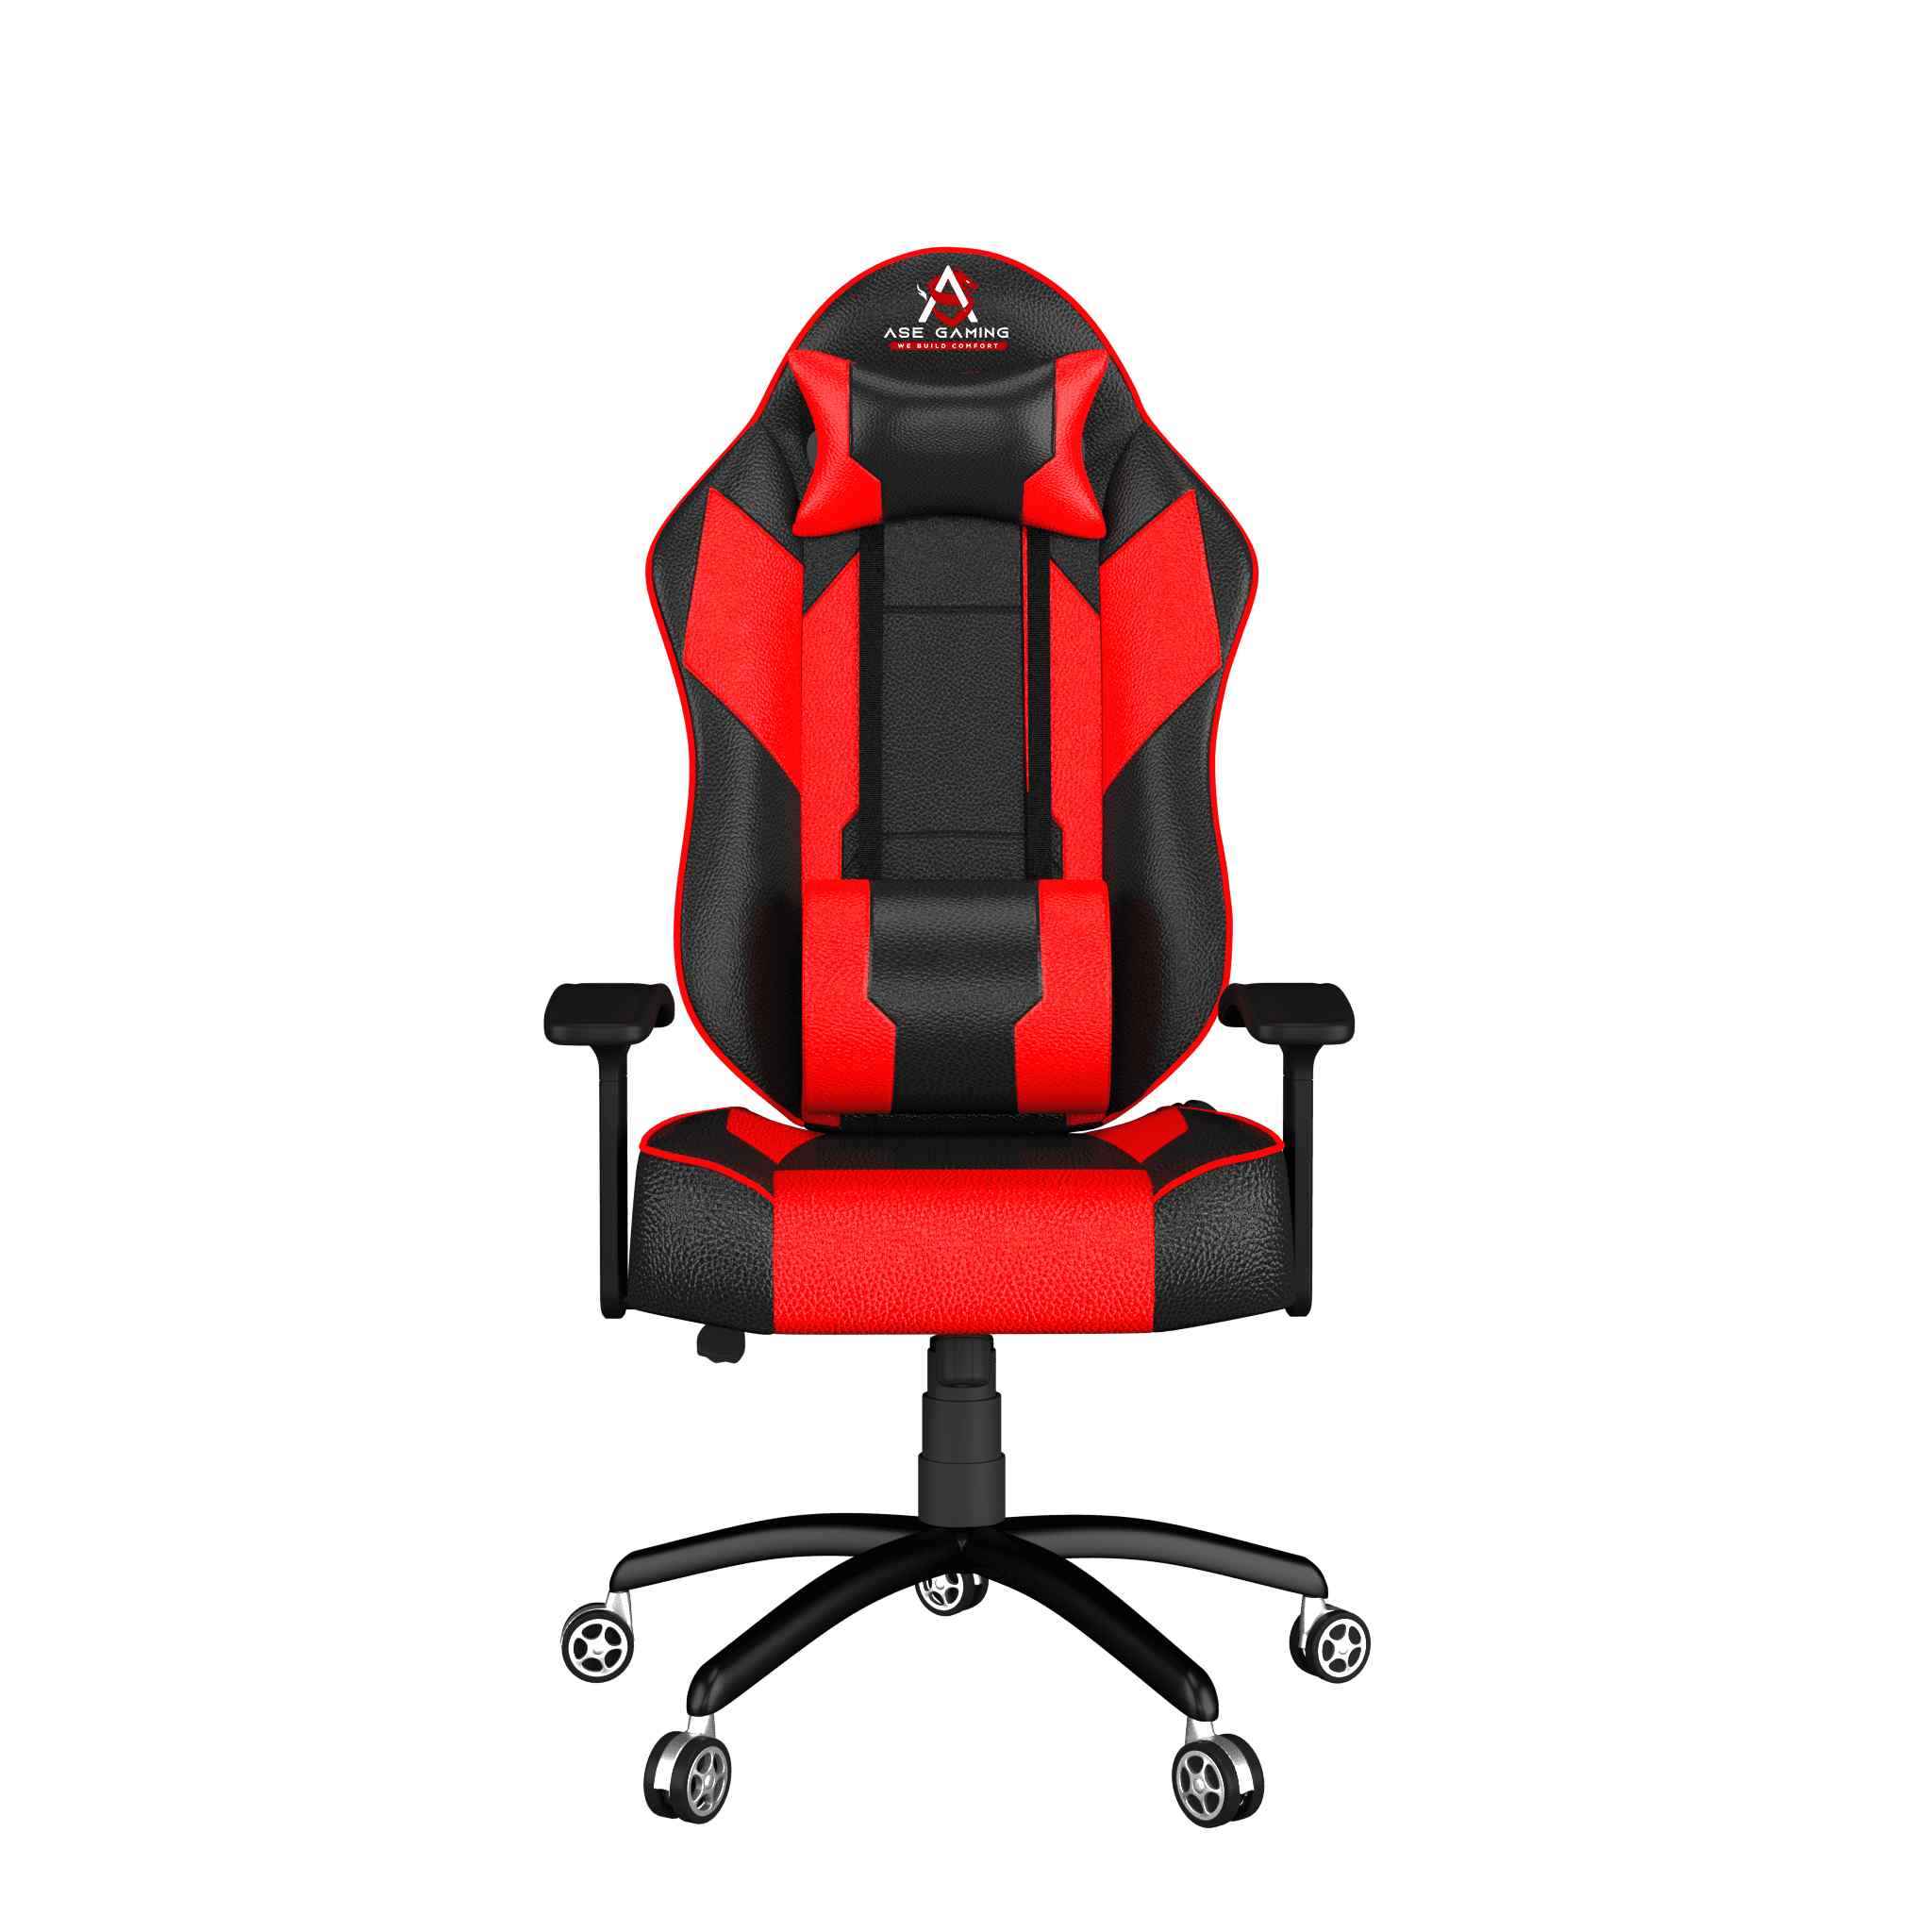 ASE Gaming Rage Series Gaming Chair with 180 Degree Recline (White & Black)